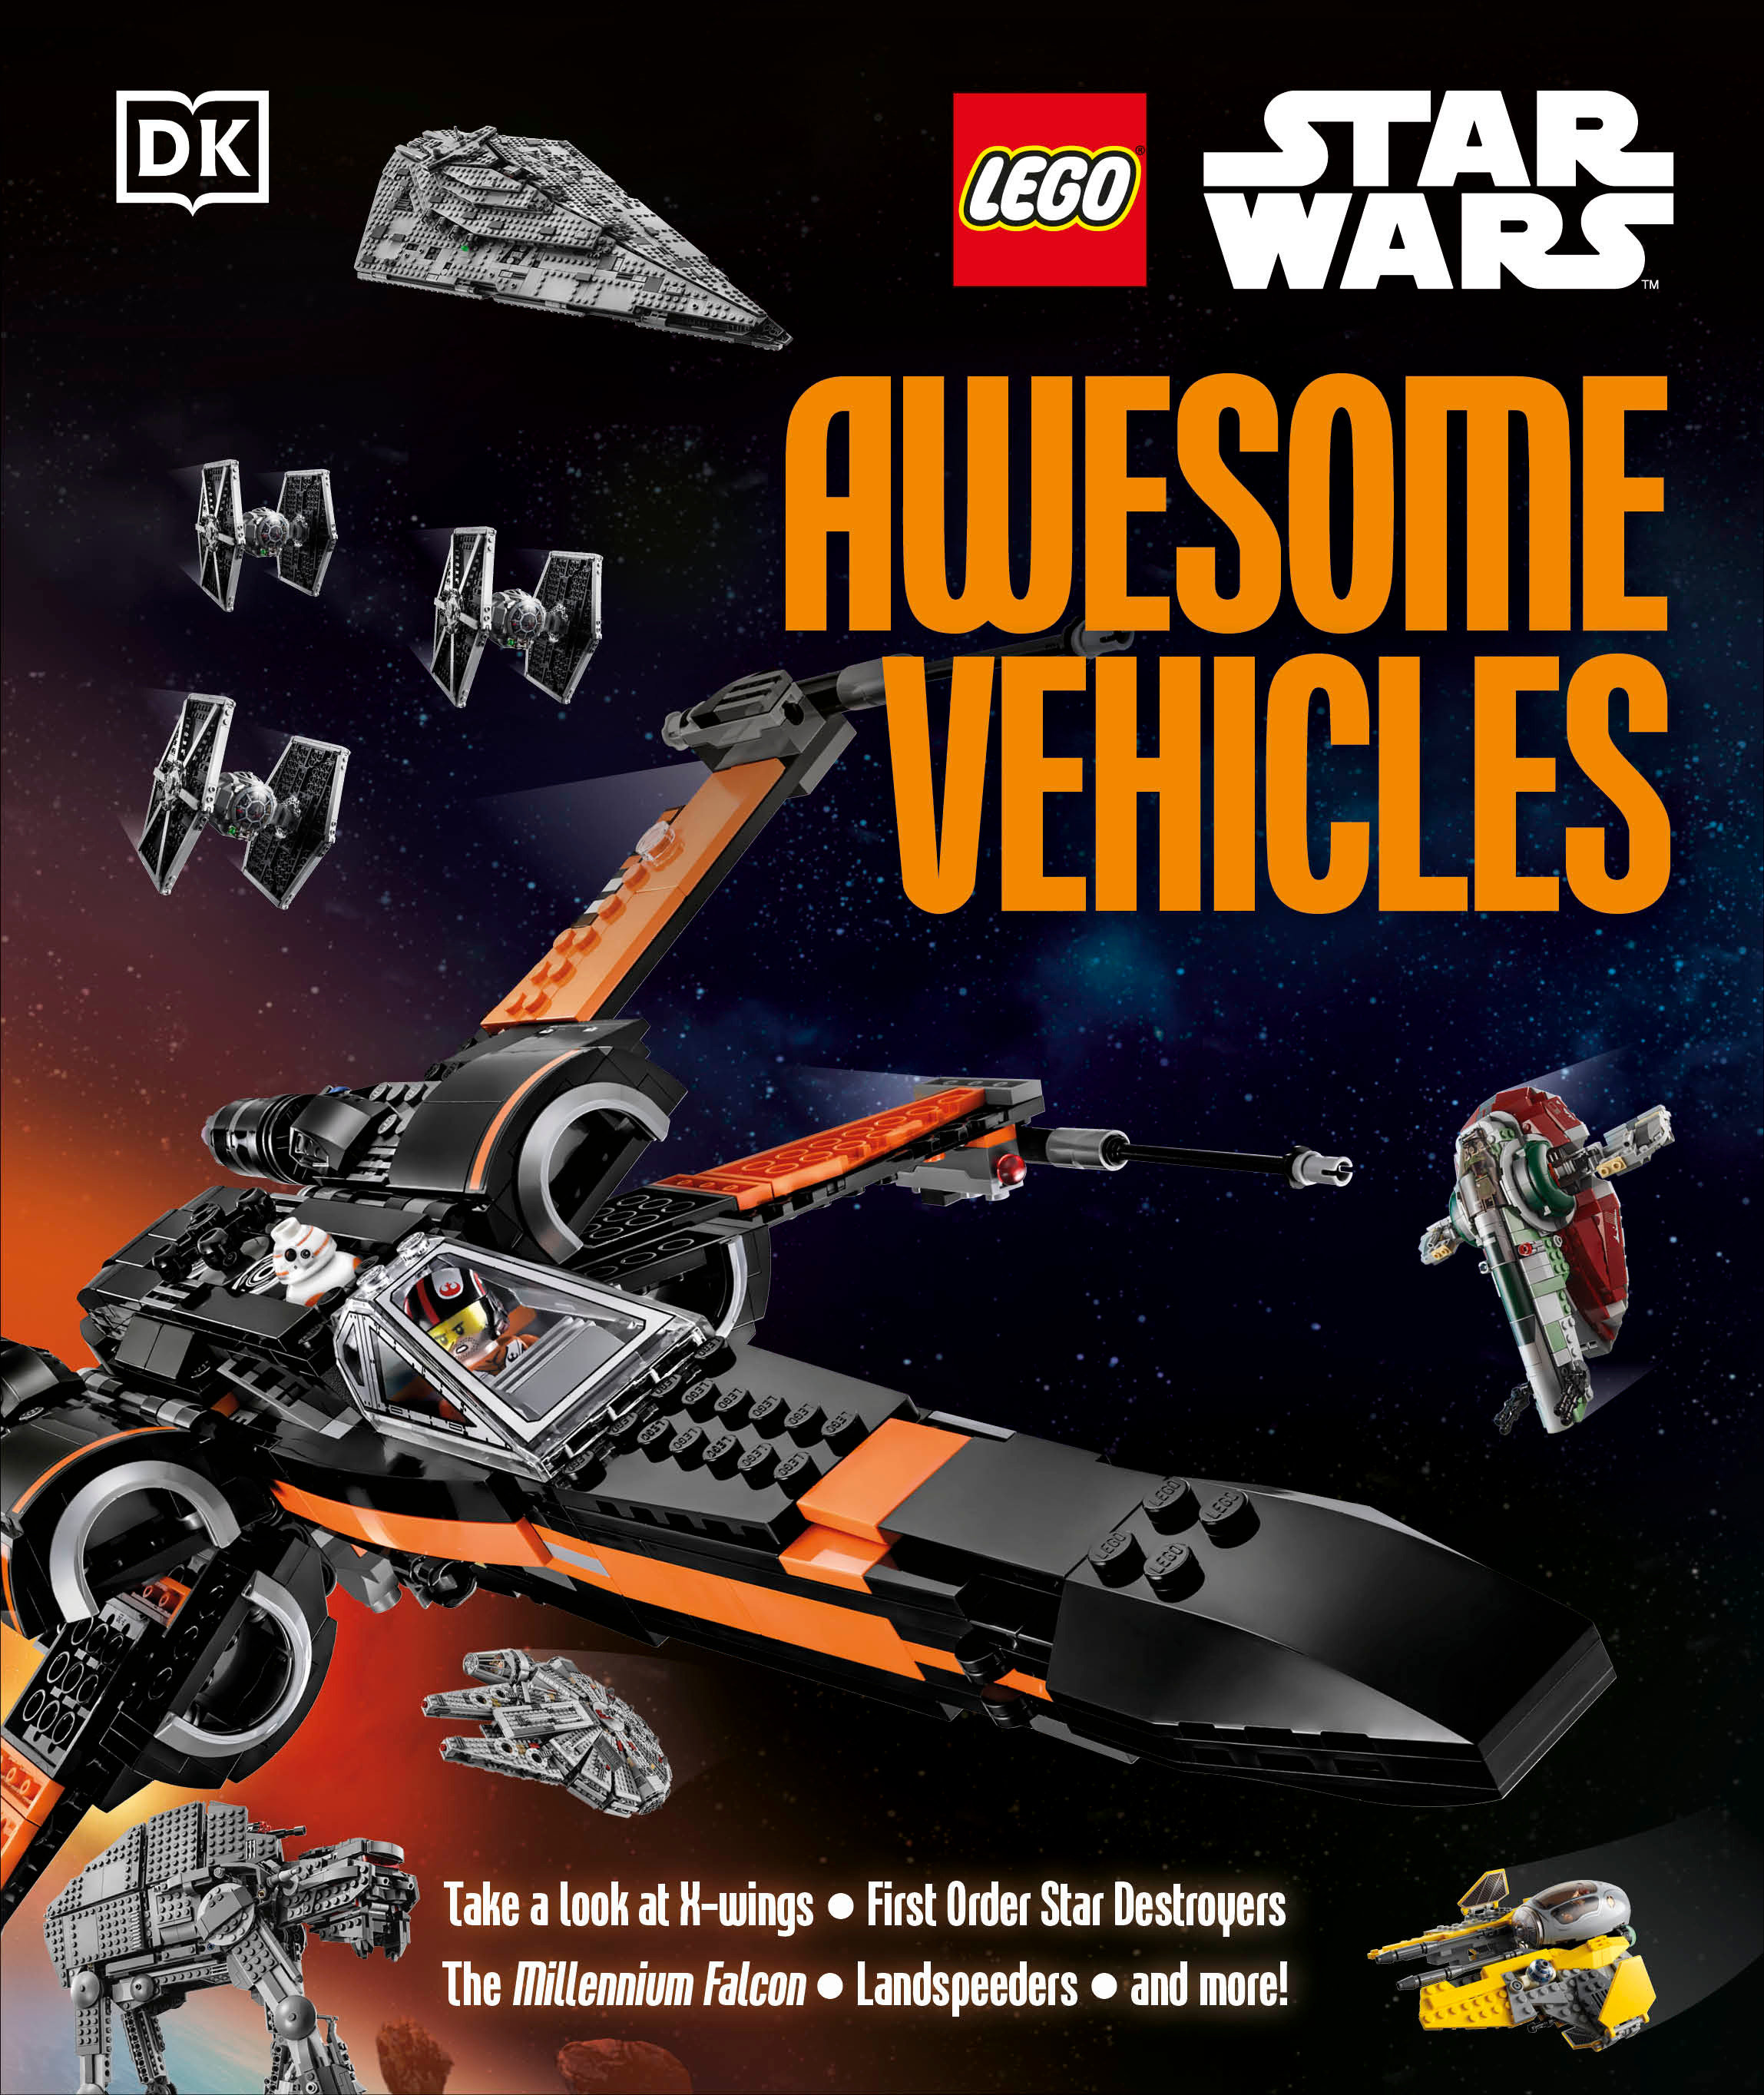 Lego Star Wars Awesome Vehicles (Hardcover Book)